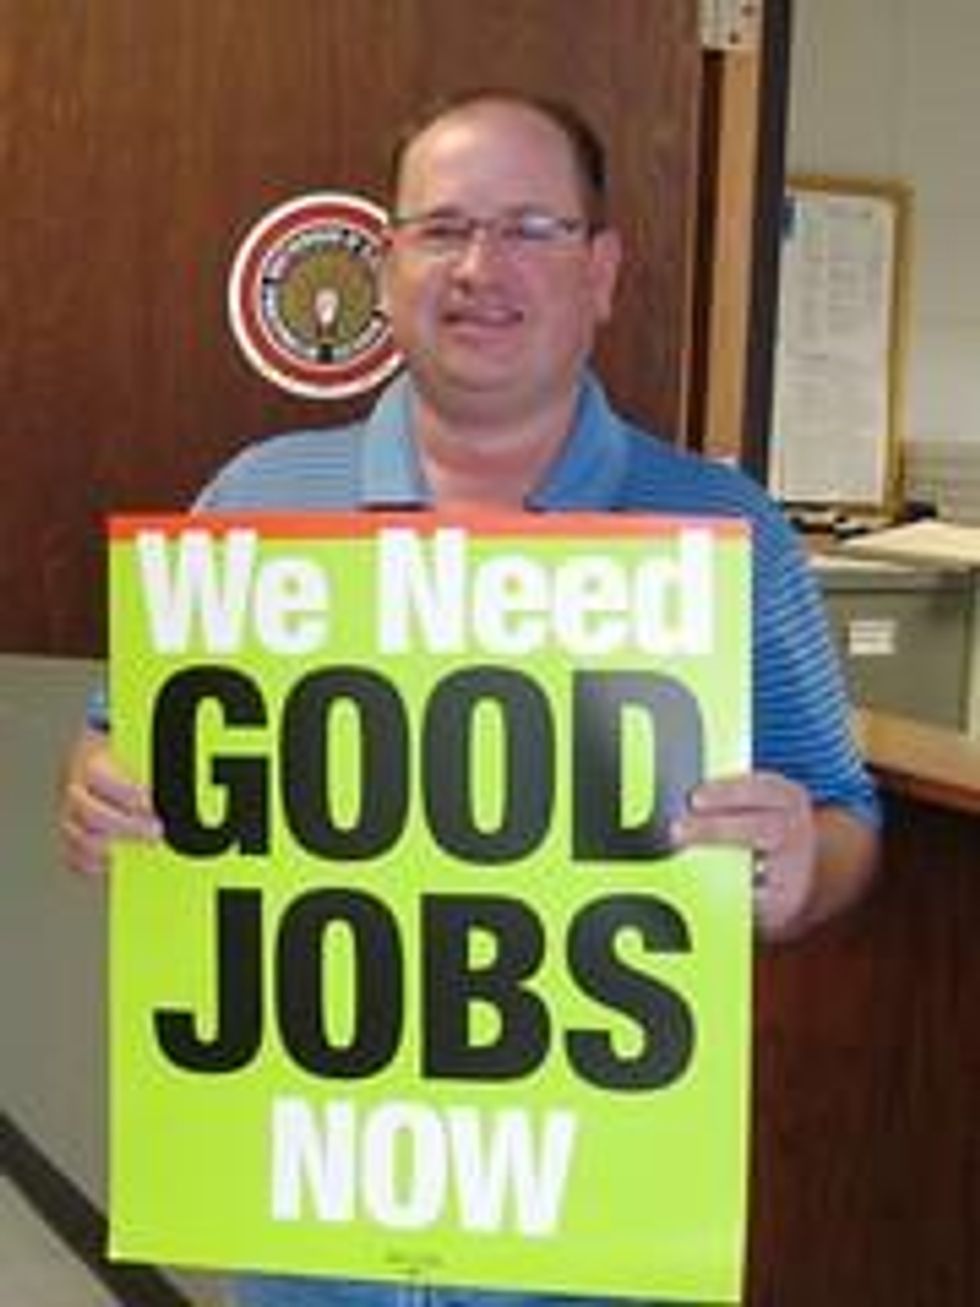 Chris Gulbrandson of IBEW Local 430 encourages congress to act on a meaningful jobs bill.